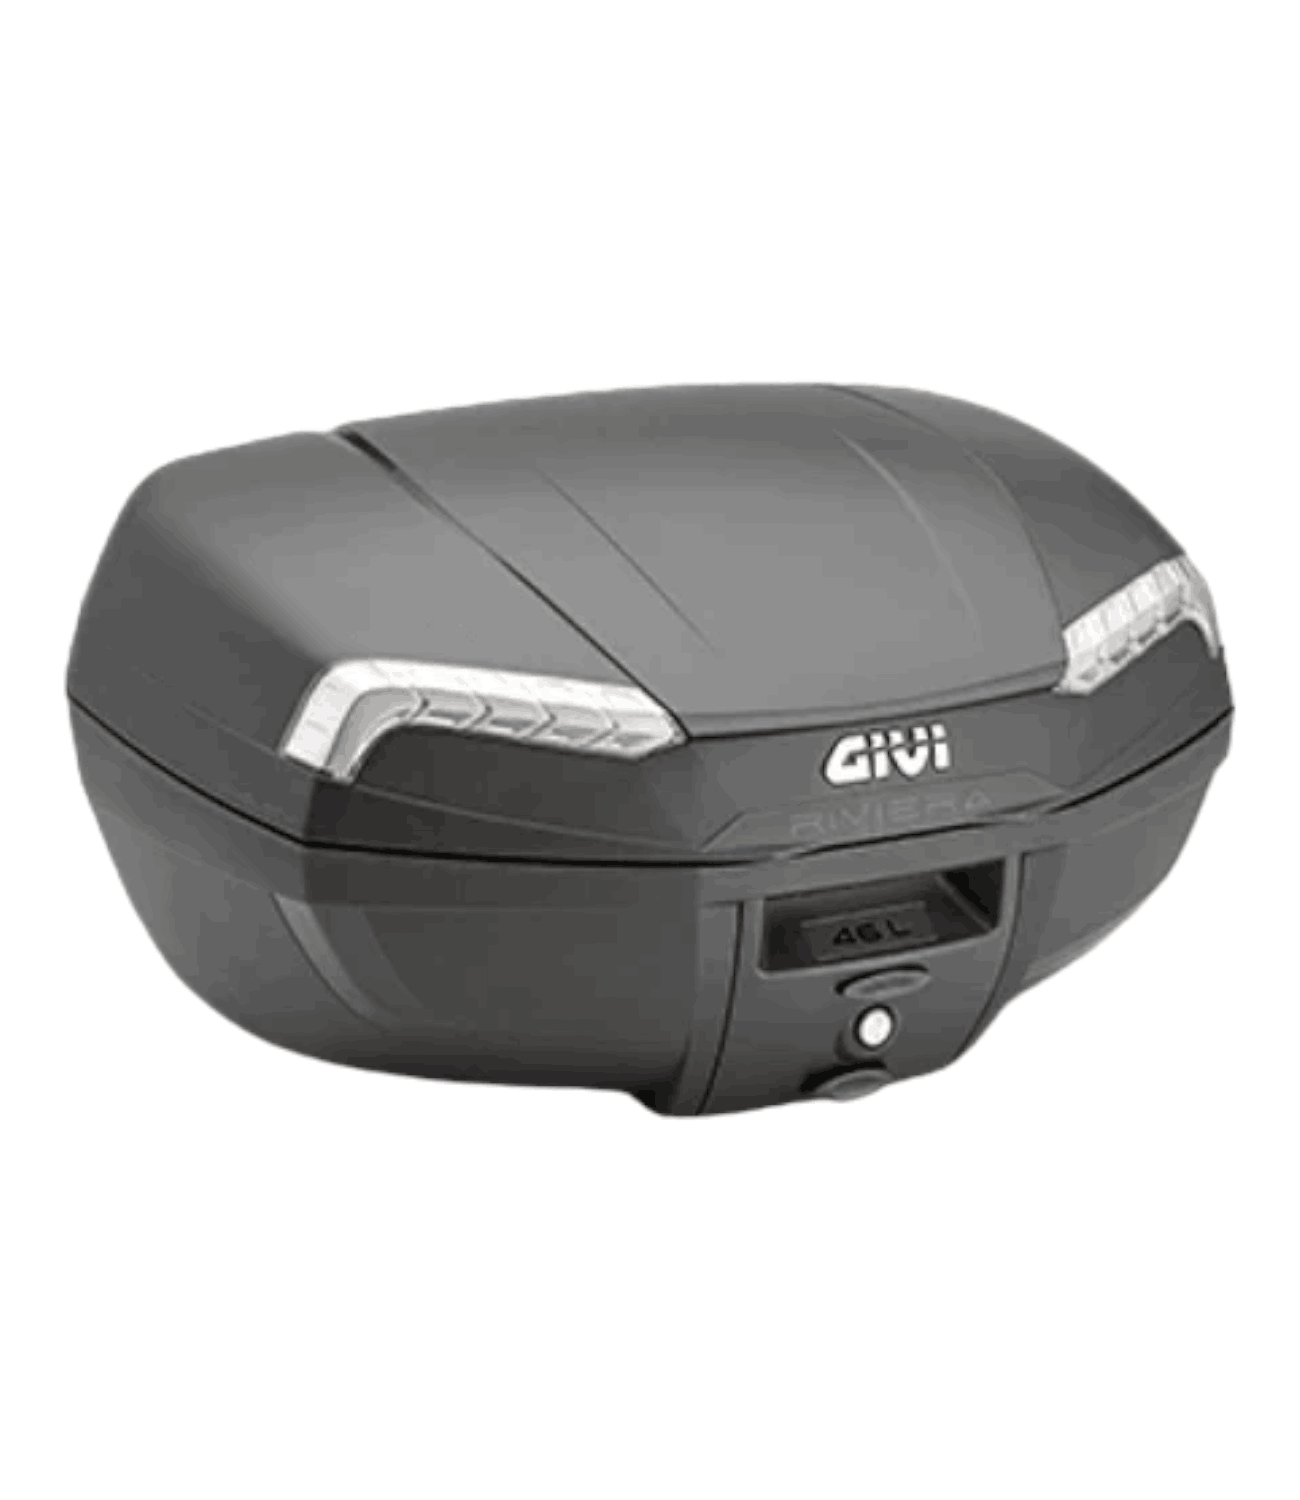 Givi - 46 Ltr Monolock® Top-Case Black With Smoked Reflectors, Universal Mounting Plate Included